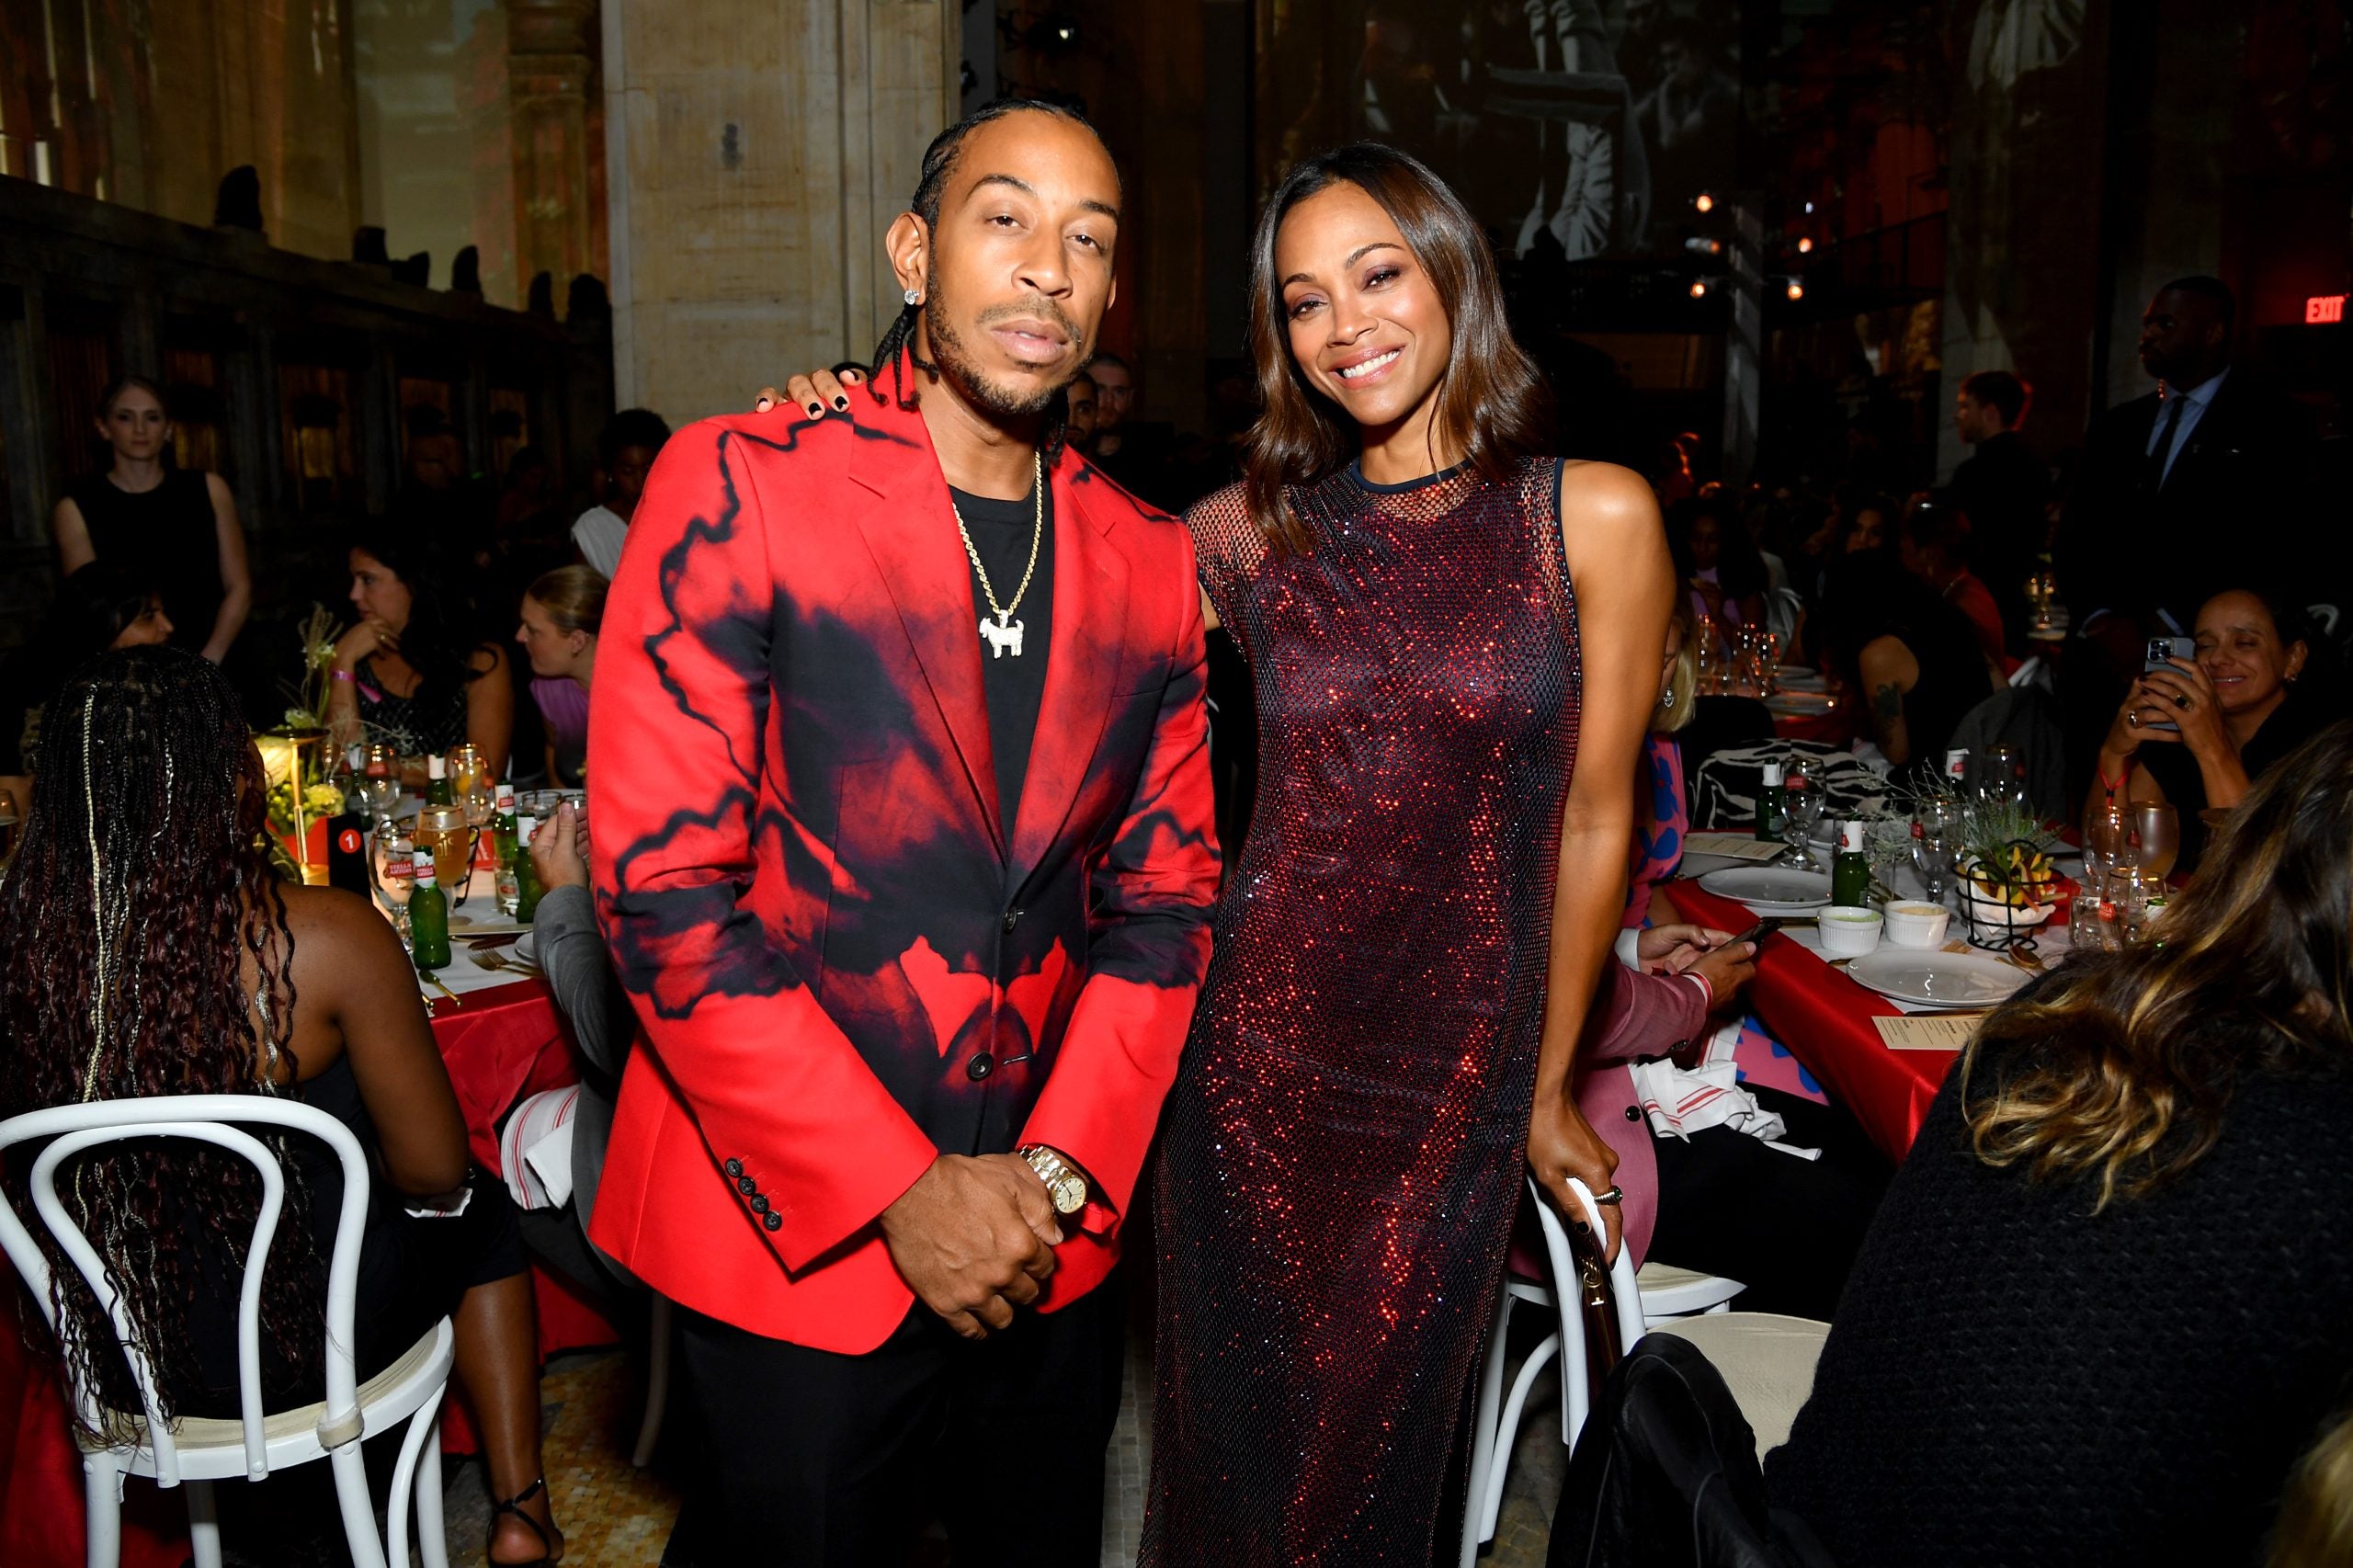 Zoe Saldaña, Ludacris And More Stars Team Up For “The World’s Most Fascinating Dinner” For A Cause